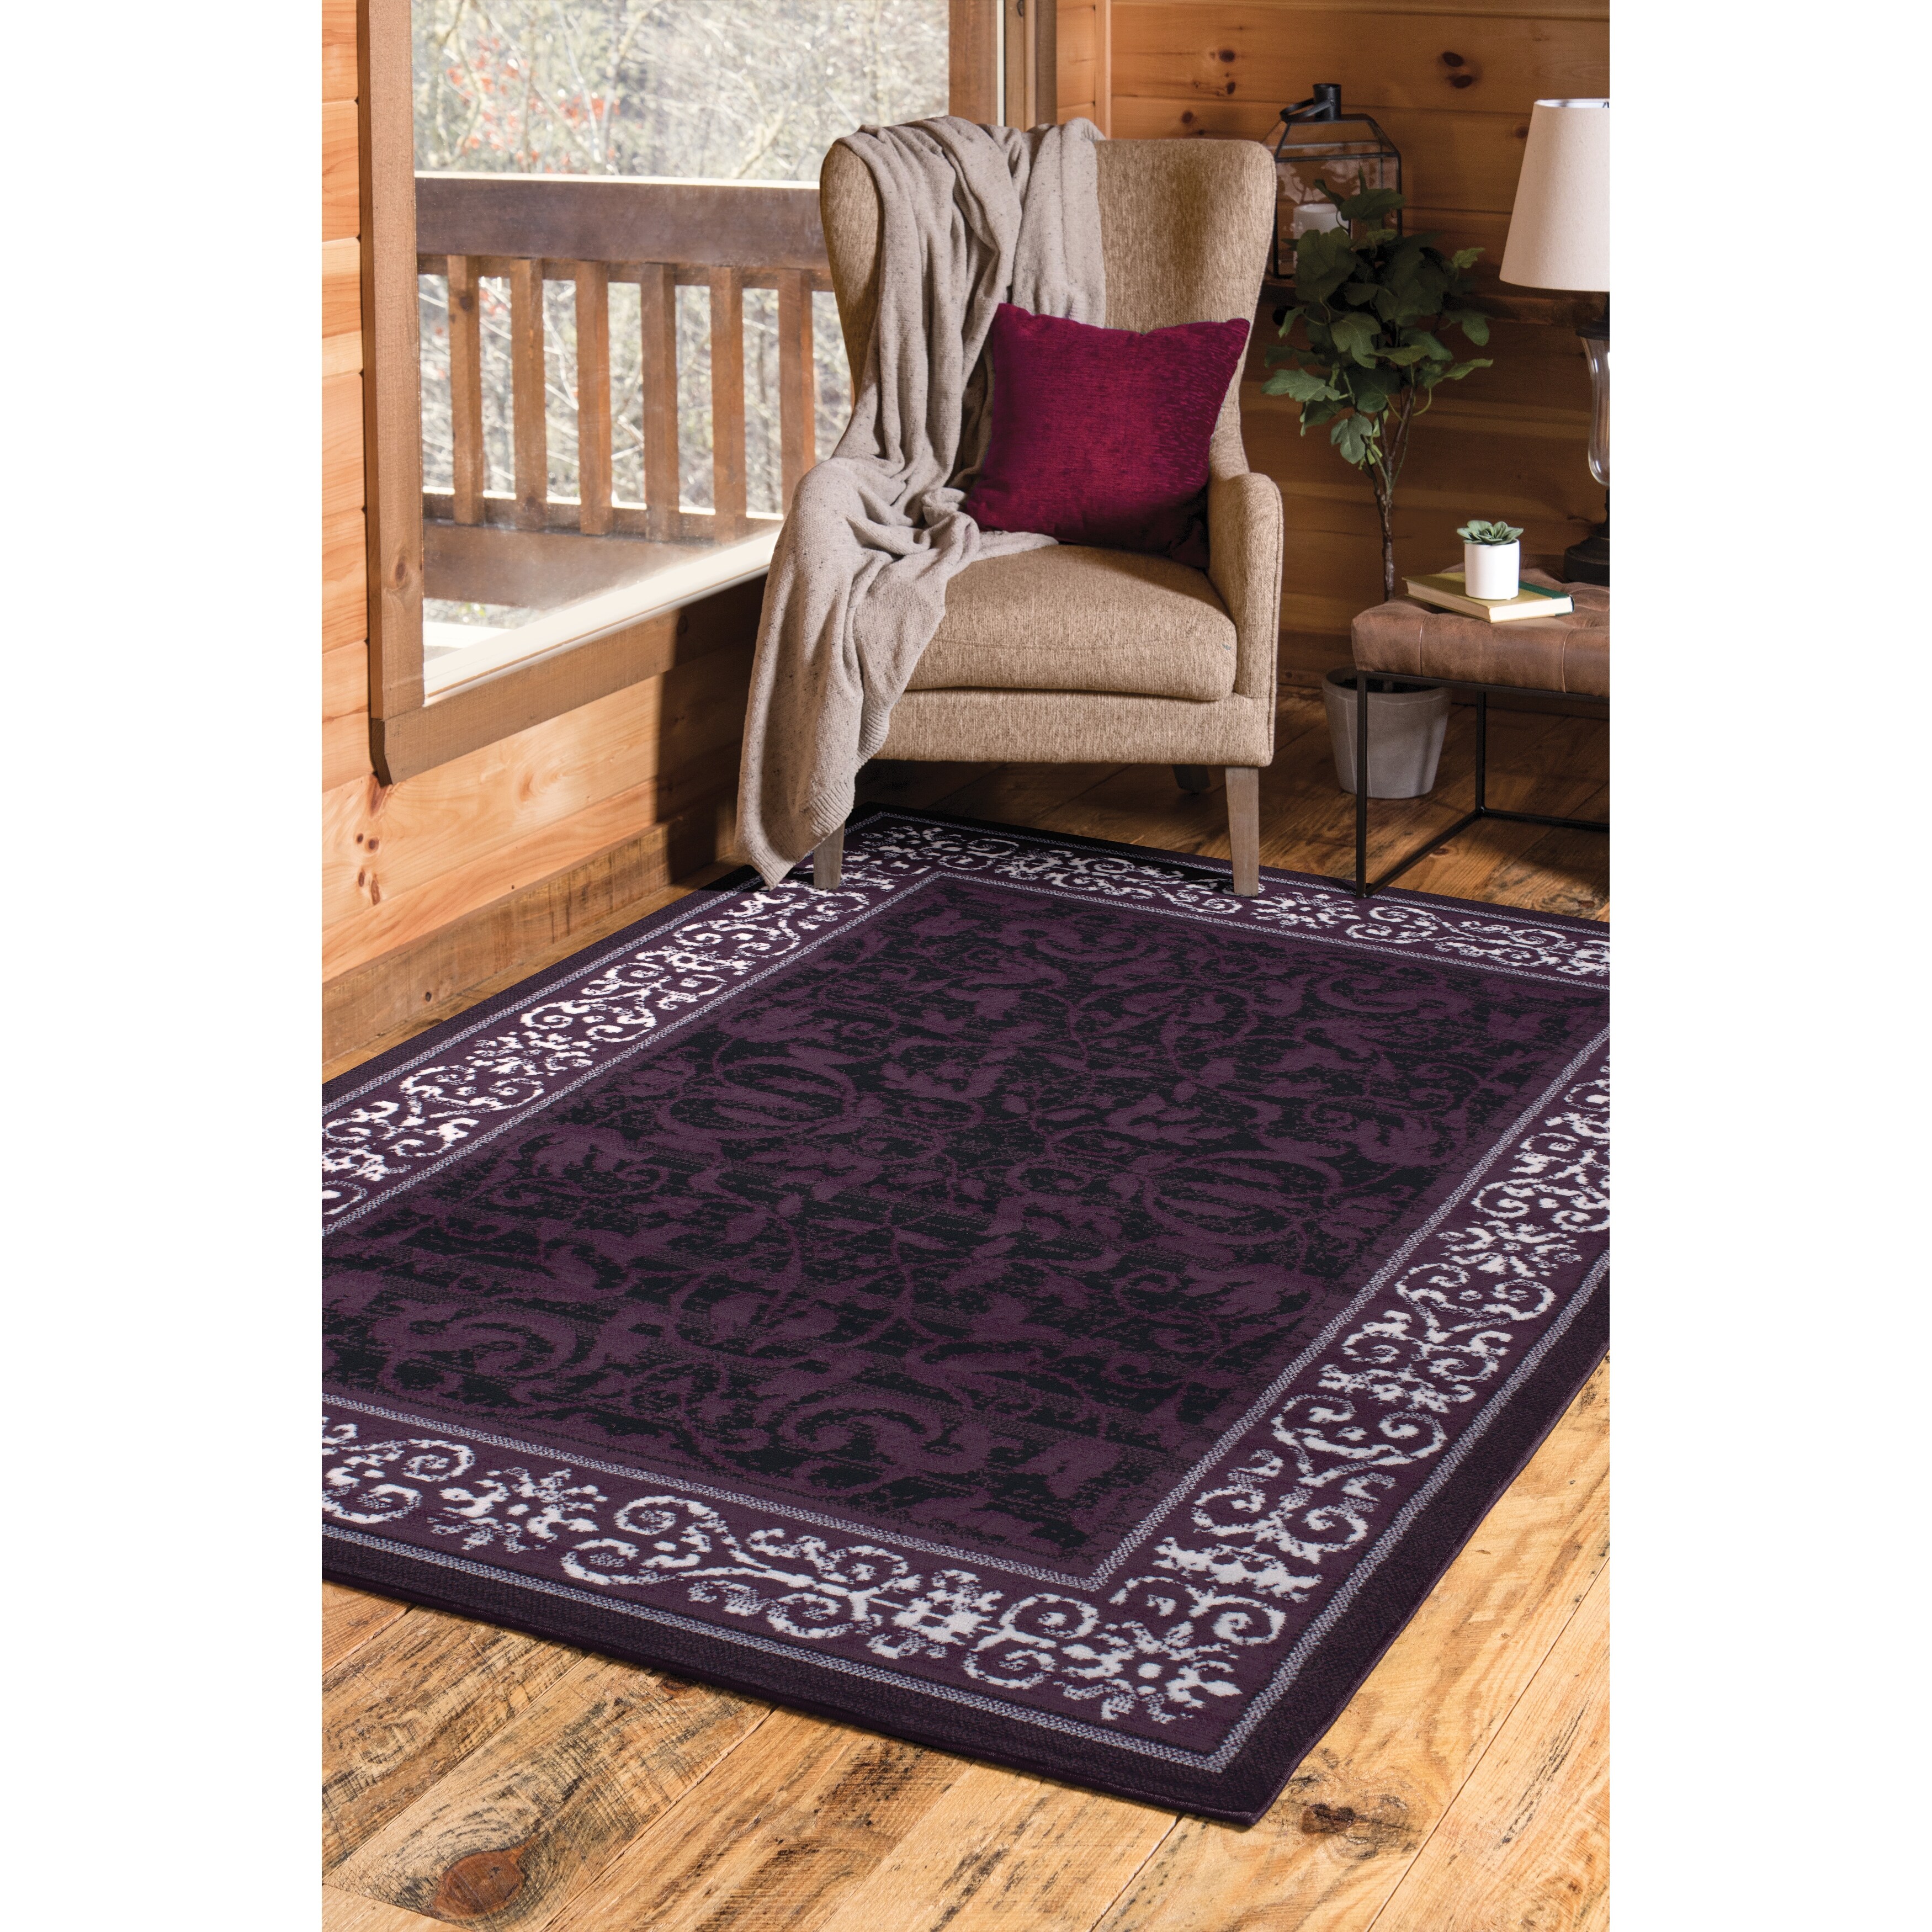 Westfield Home Montclaire Genevieve Red Area Rug - 5'3 x 7'2